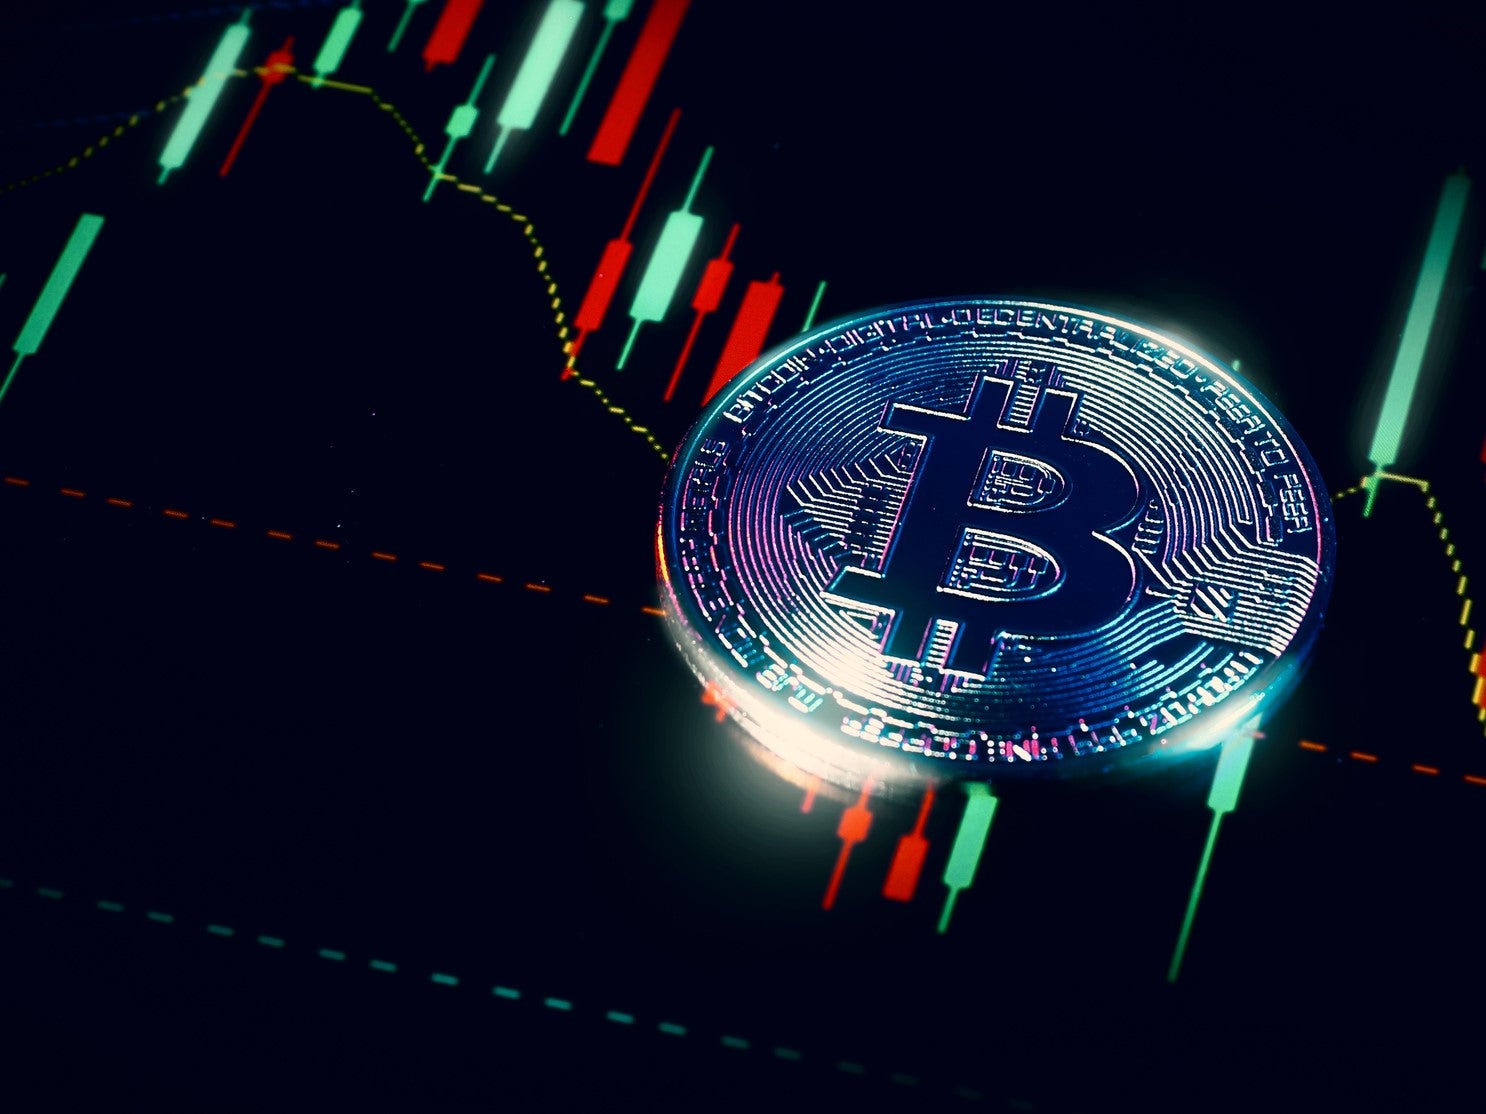 Bitcoin fell in price from above $52,000 to below $44,000 on 7 September 2021, on the same day El Salvador officially recognised the cryptocurrency as legal tender